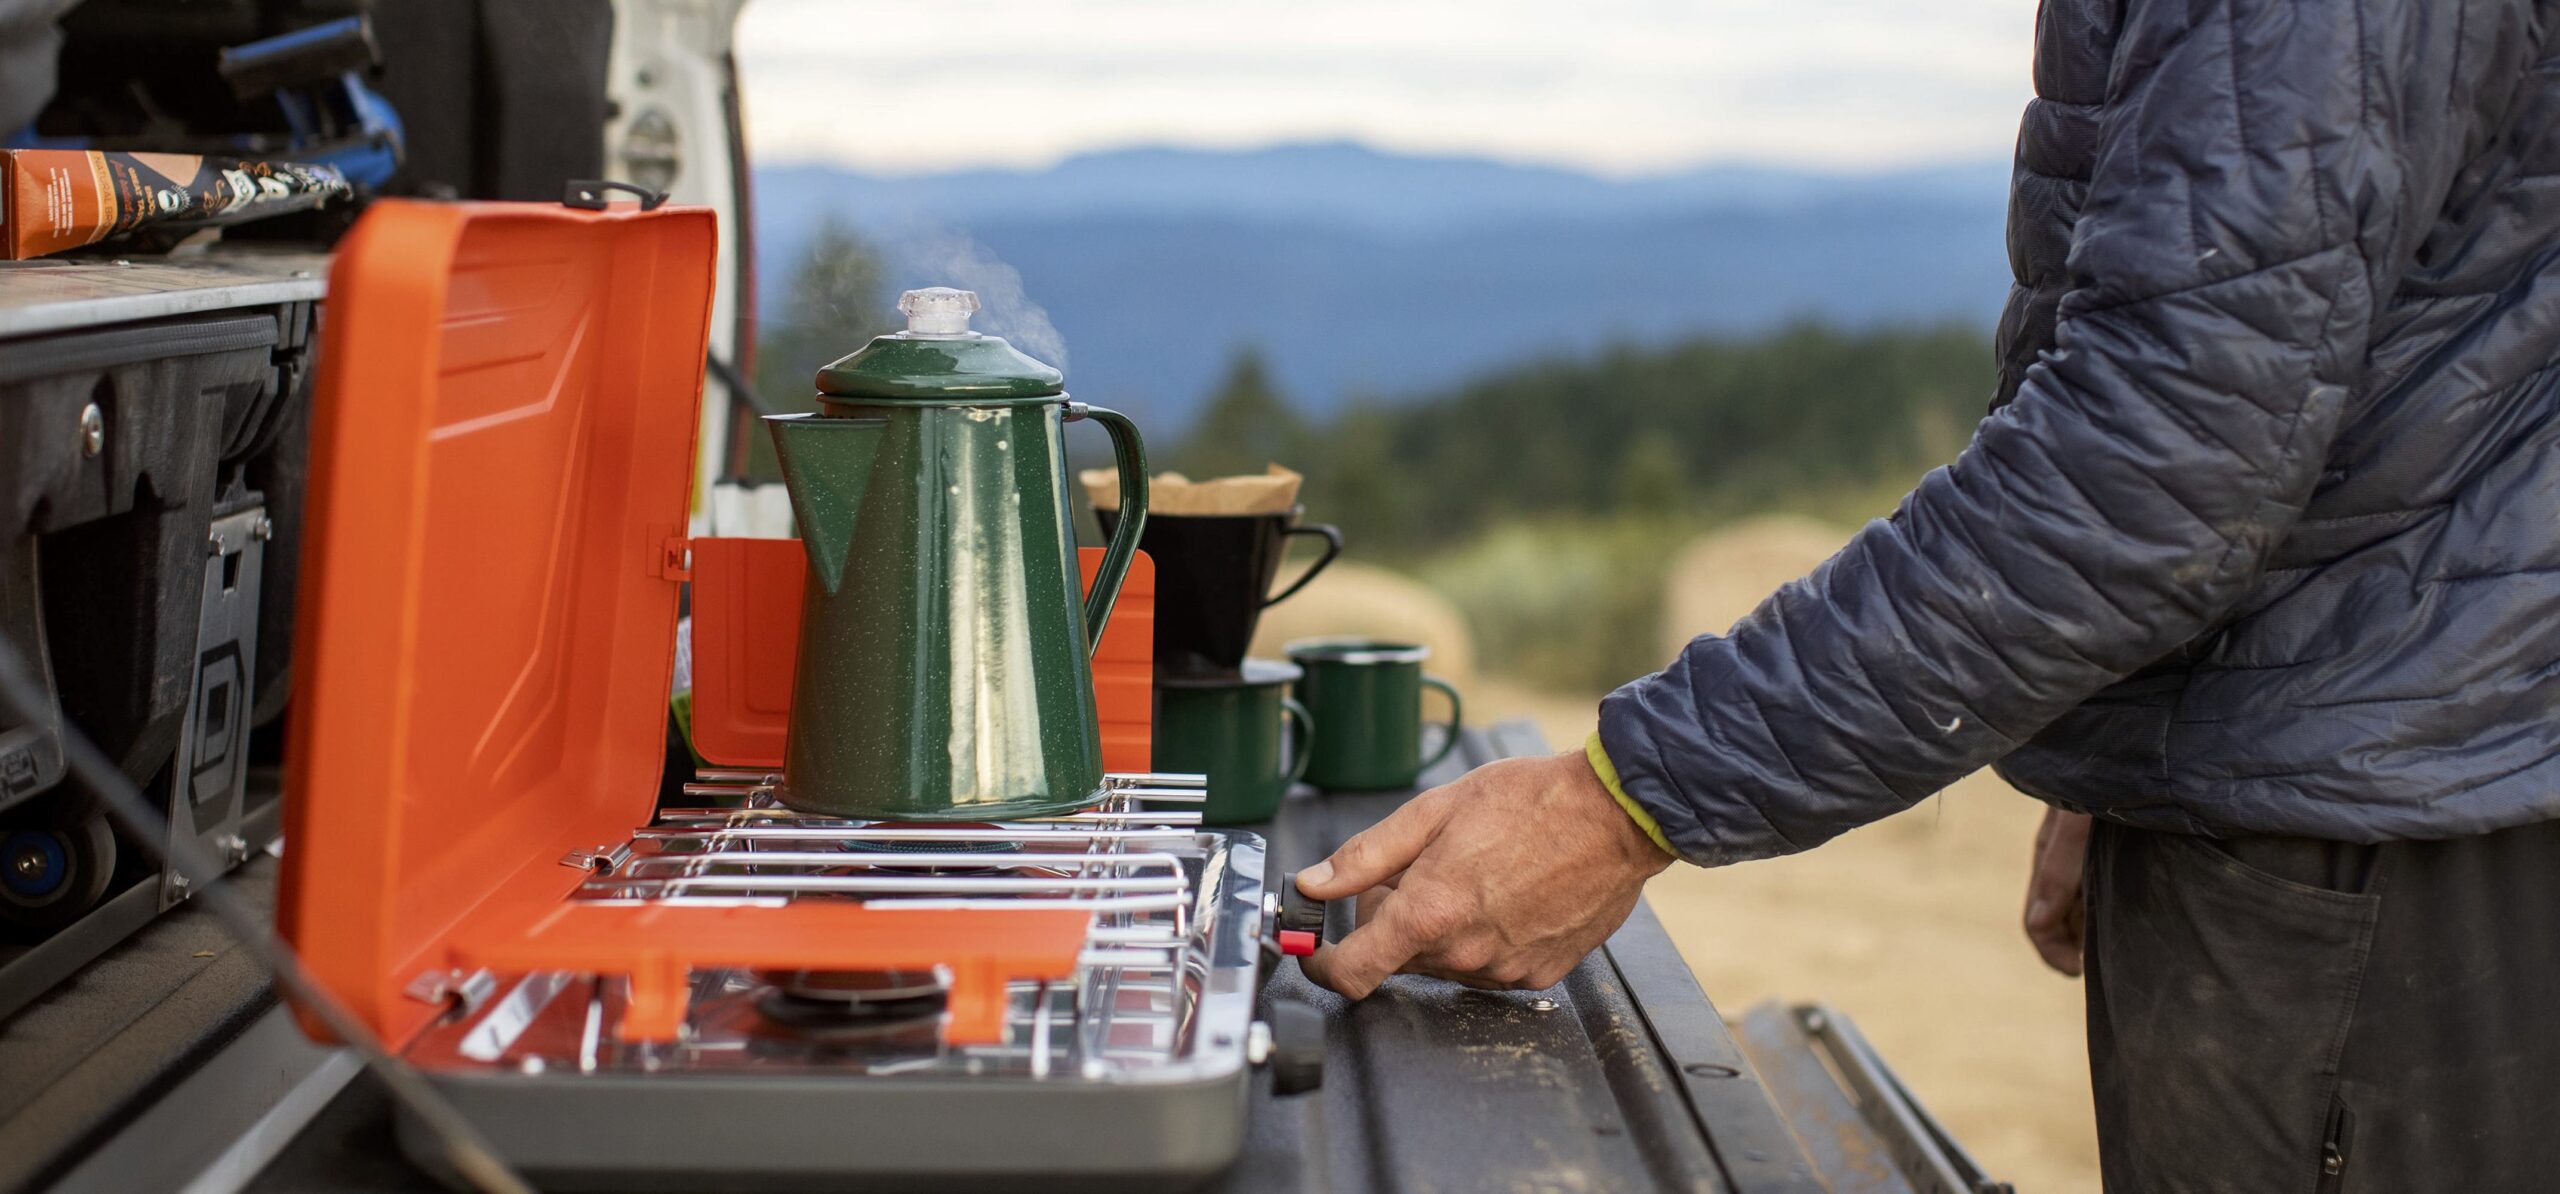 In this image, a hand turns on a camp stove to heat water for pour-over coffee, setting the stage for a tranquil morning camping experience in the great outdoors. The up-close shot focuses on the action, withholding the identity of the person behind the scene.